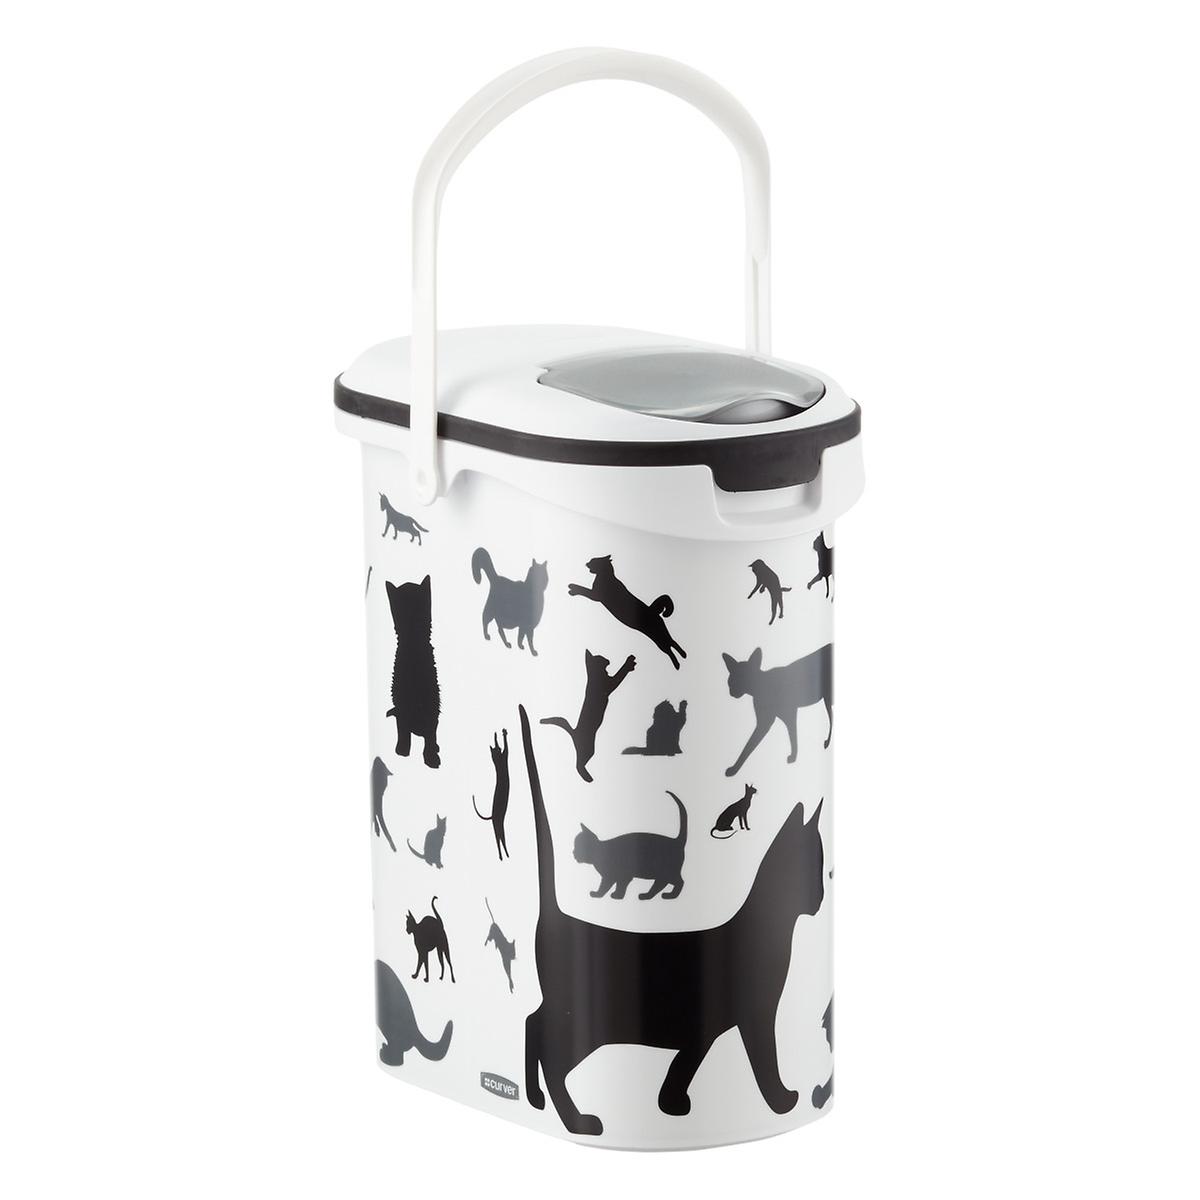 Dry Cat Food Container | The Container Store